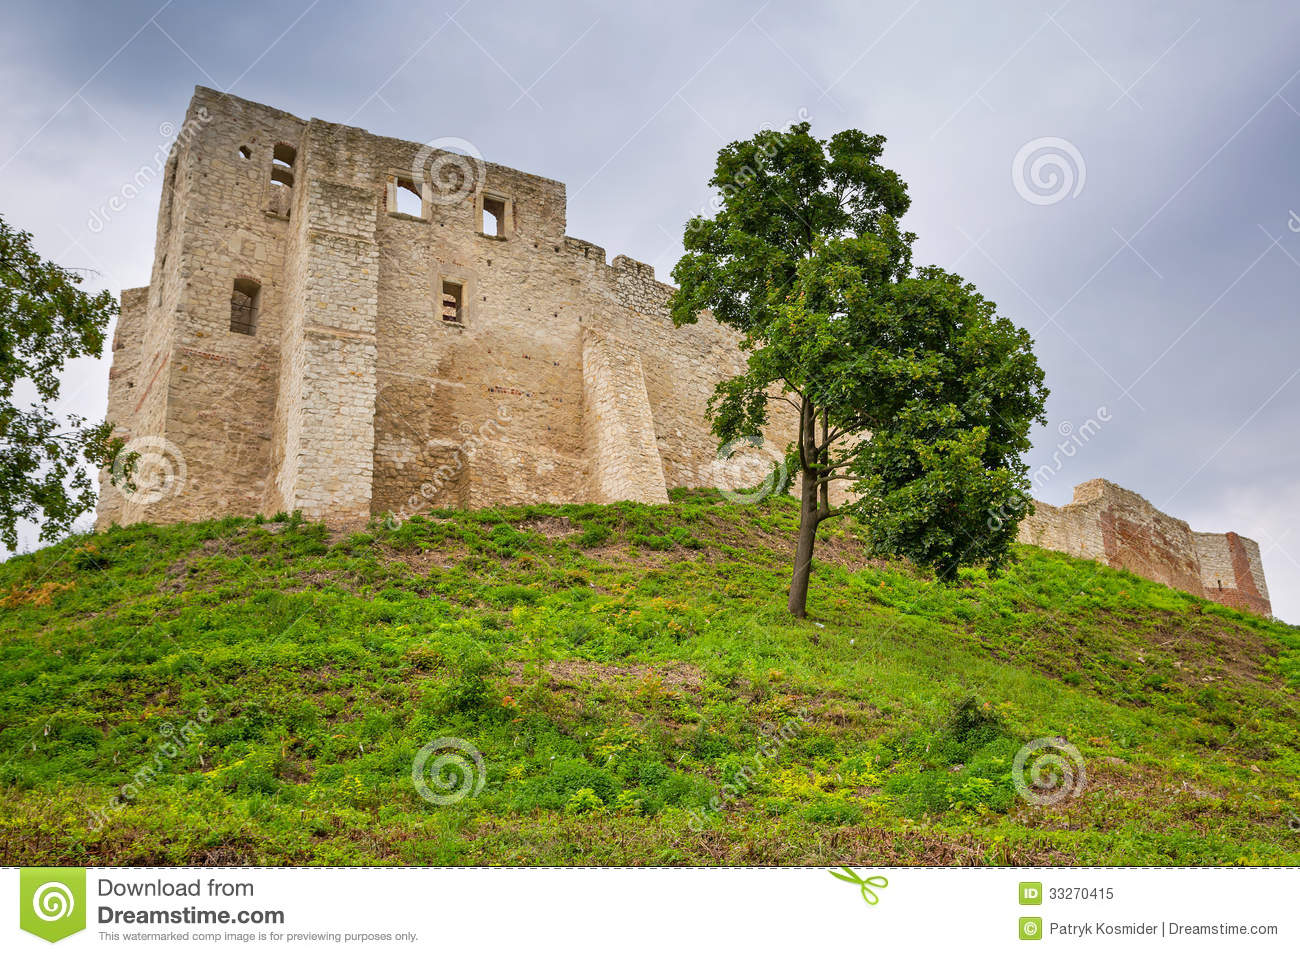 HD Quality Wallpaper | Collection: Man Made, 1300x956 Kazimierz Dolny Castle